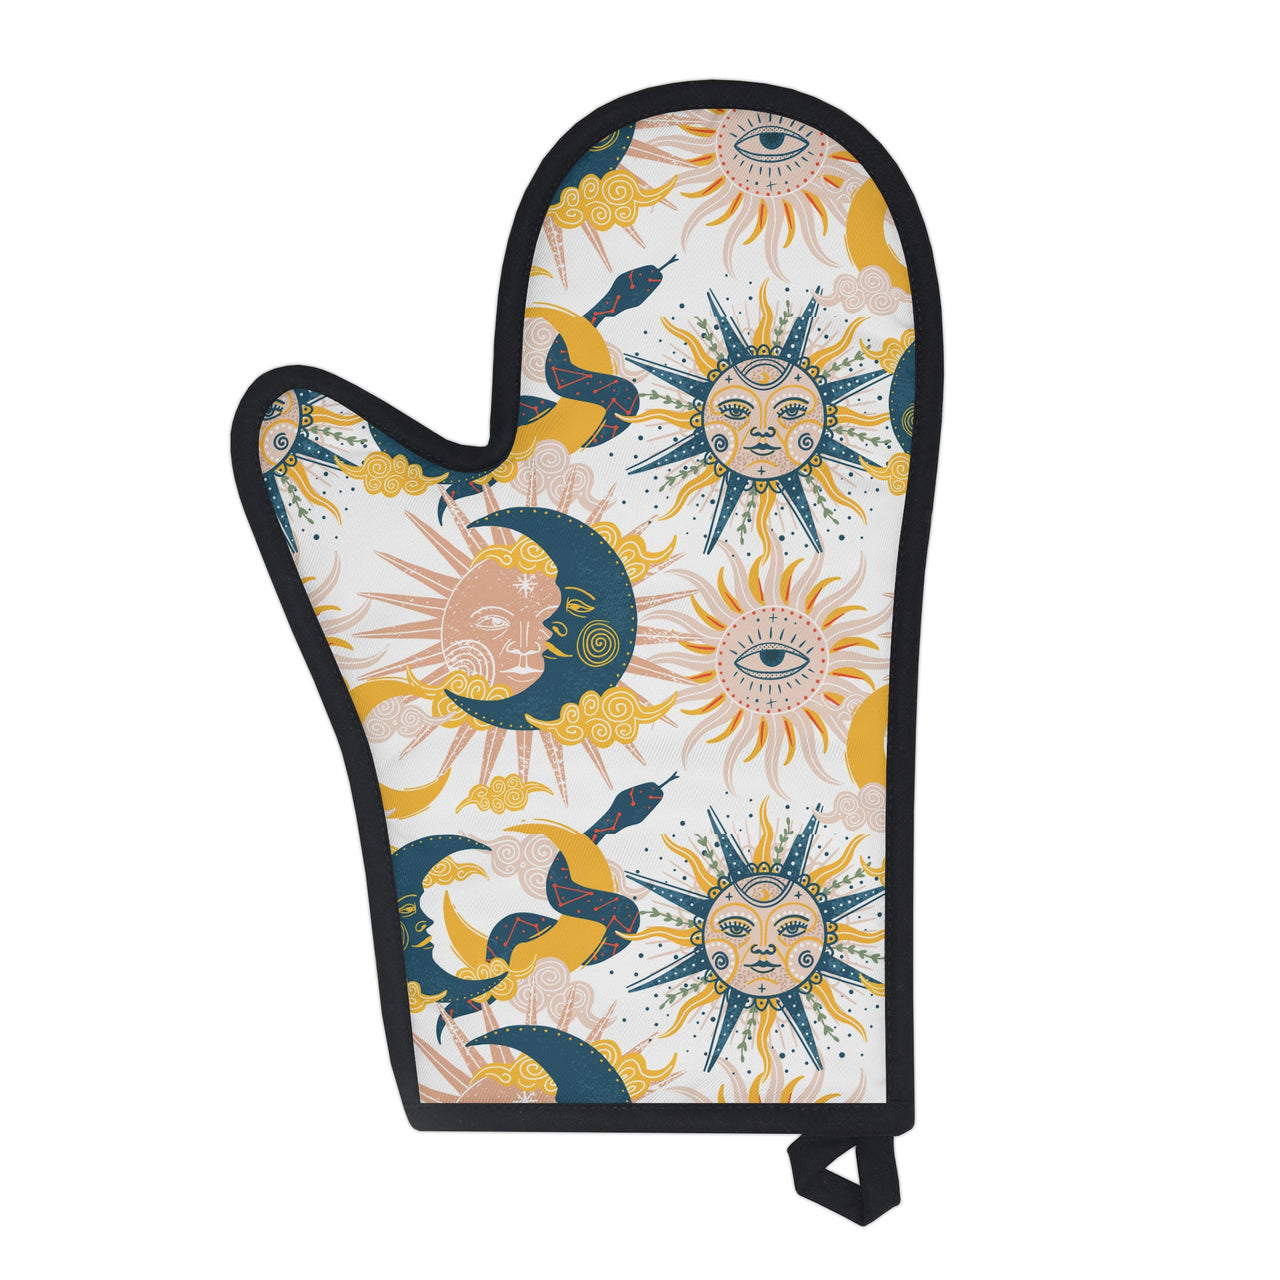 Mystical Sun and Moon Oven Glove, Blue and Yellow